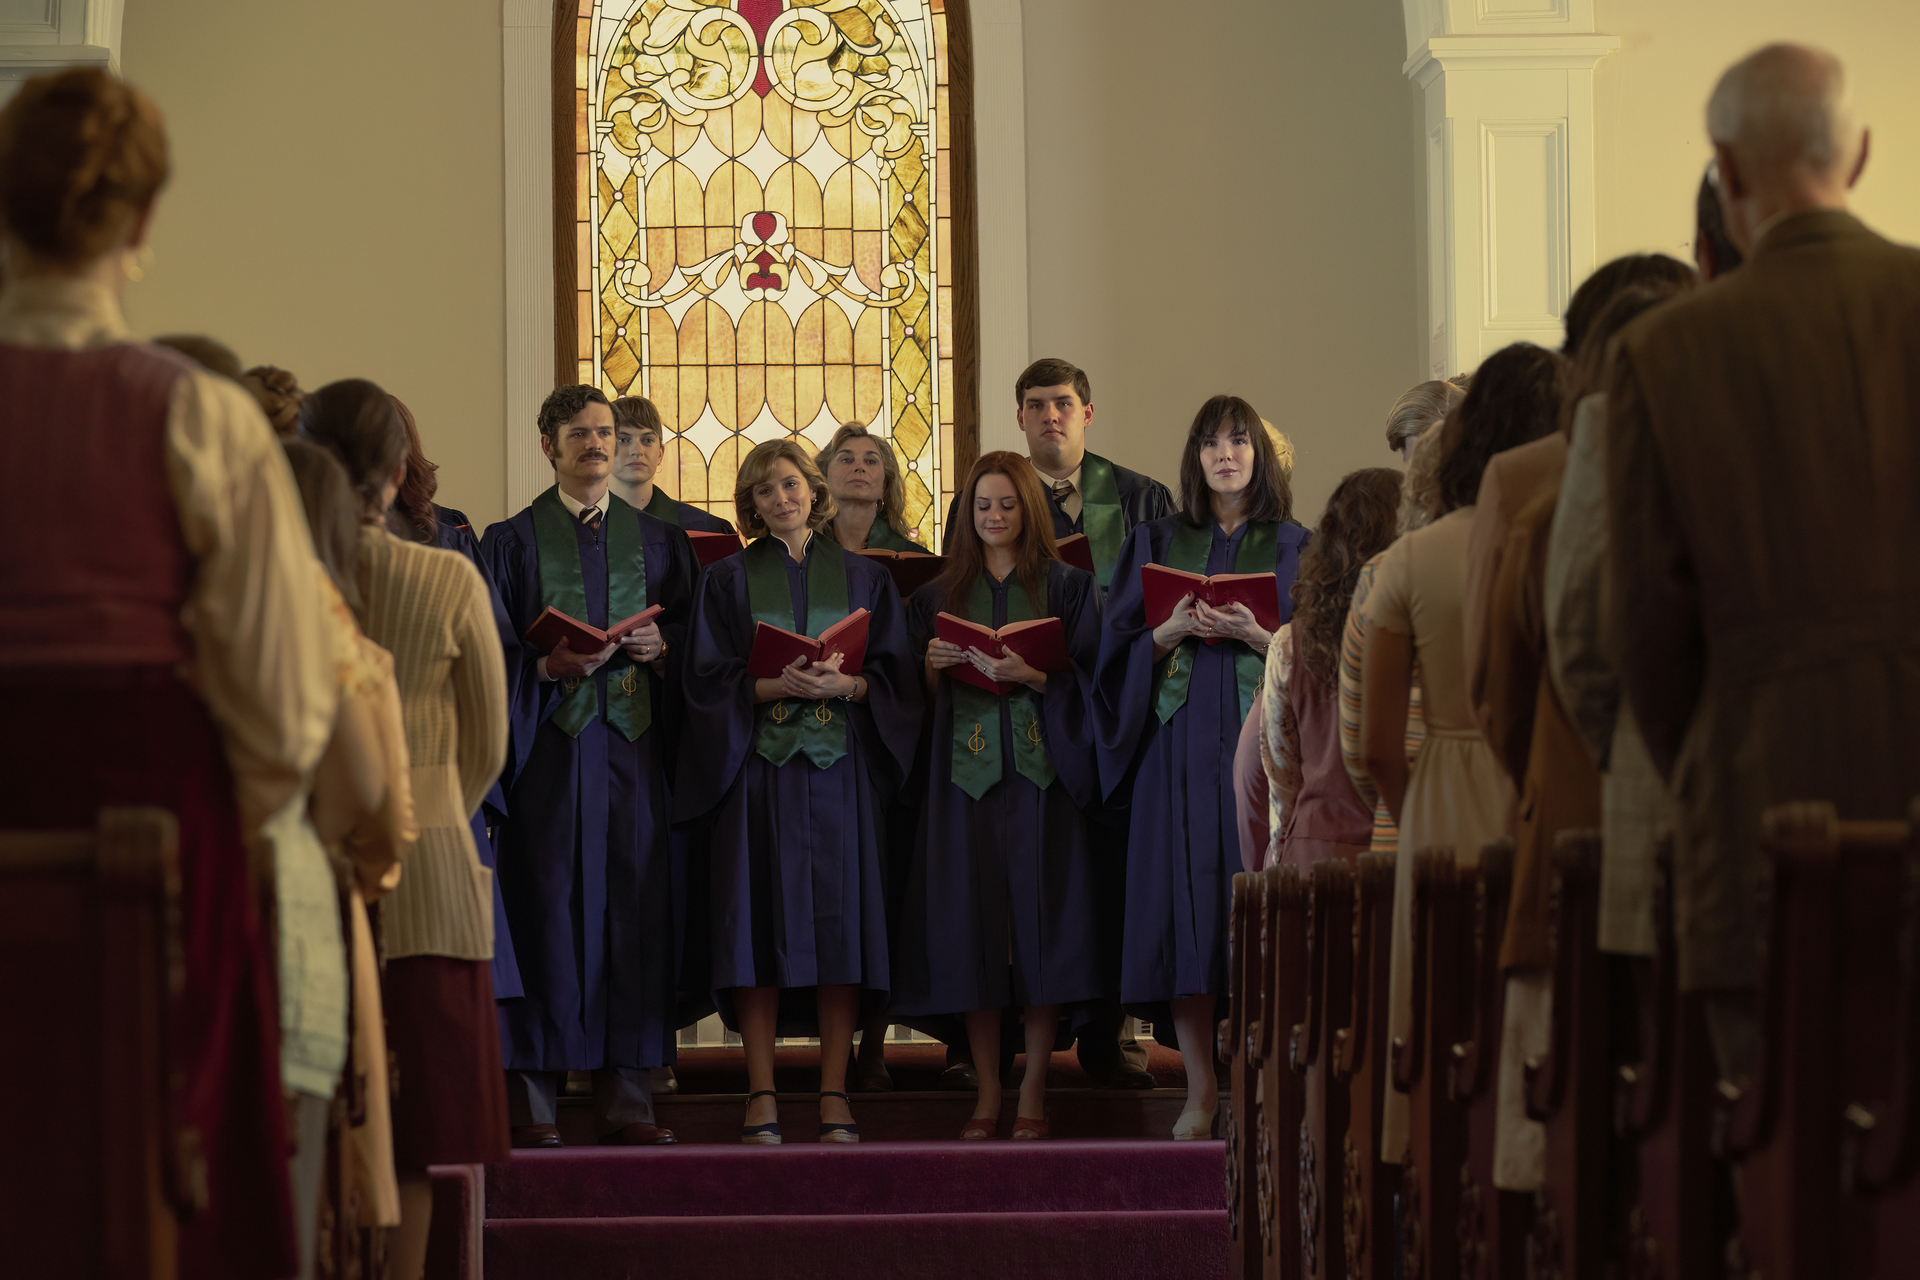 A church choir singing in front of a congregation